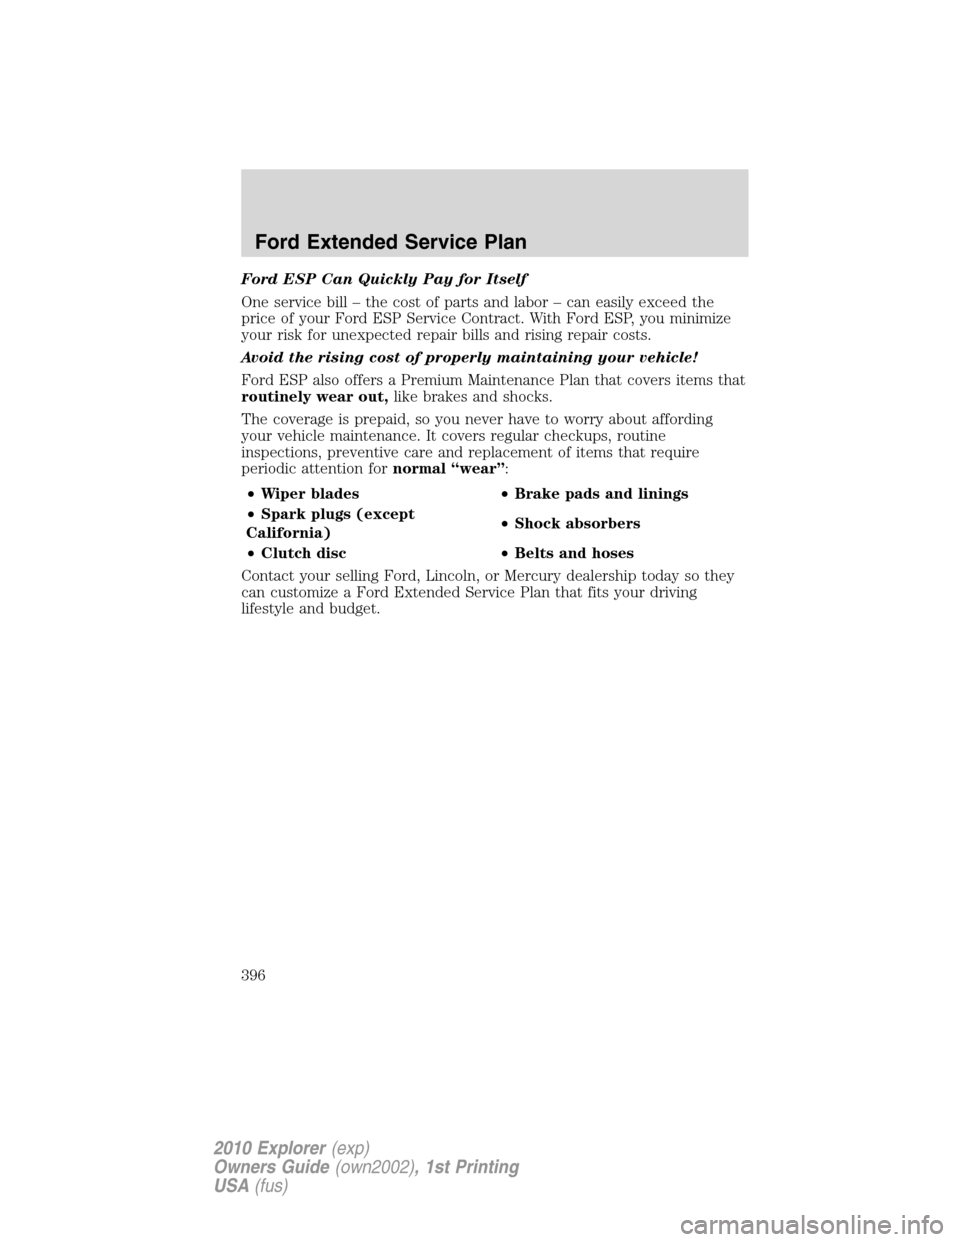 FORD EXPLORER 2010 4.G Manual PDF Ford ESP Can Quickly Pay for Itself
One service bill – the cost of parts and labor – can easily exceed the
price of your Ford ESP Service Contract. With Ford ESP, you minimize
your risk for unexpe